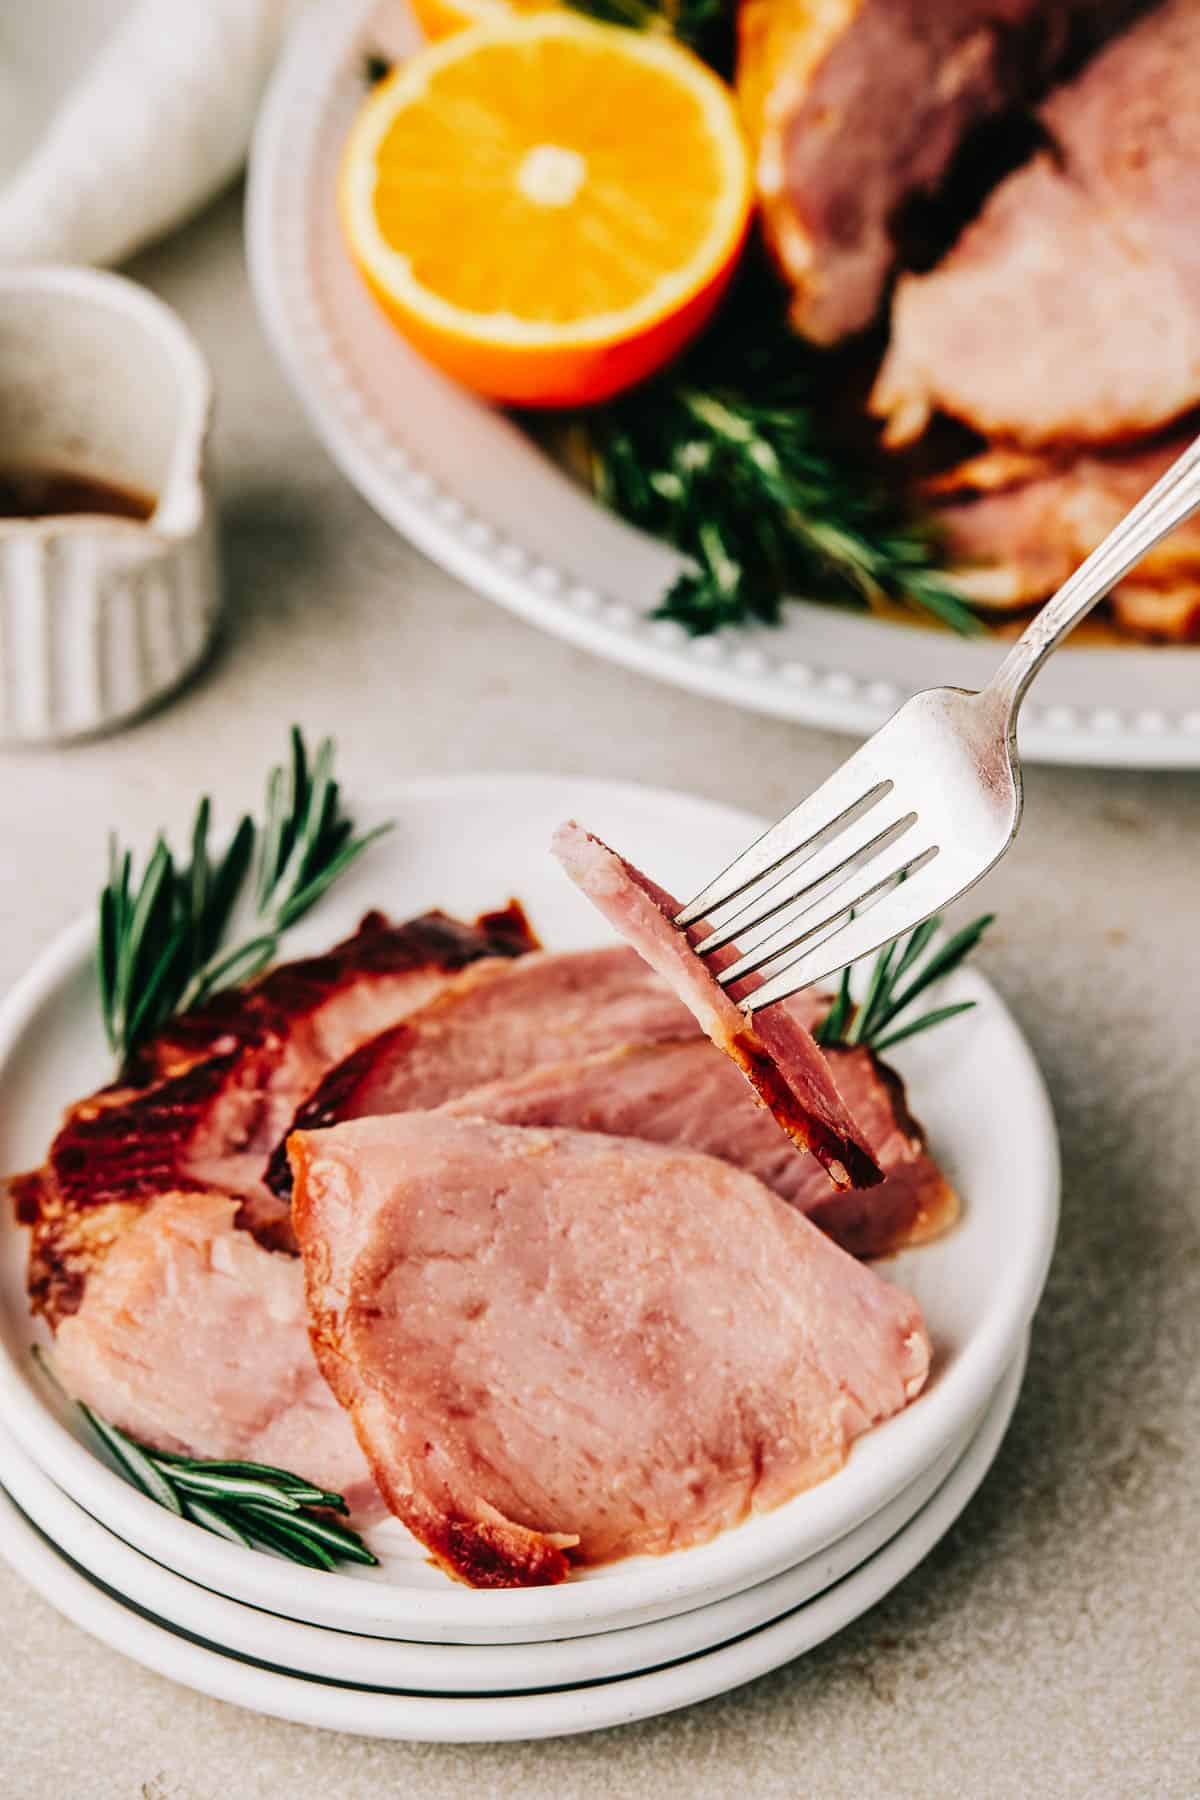 A fork lifting a slice of ham from a small plate.